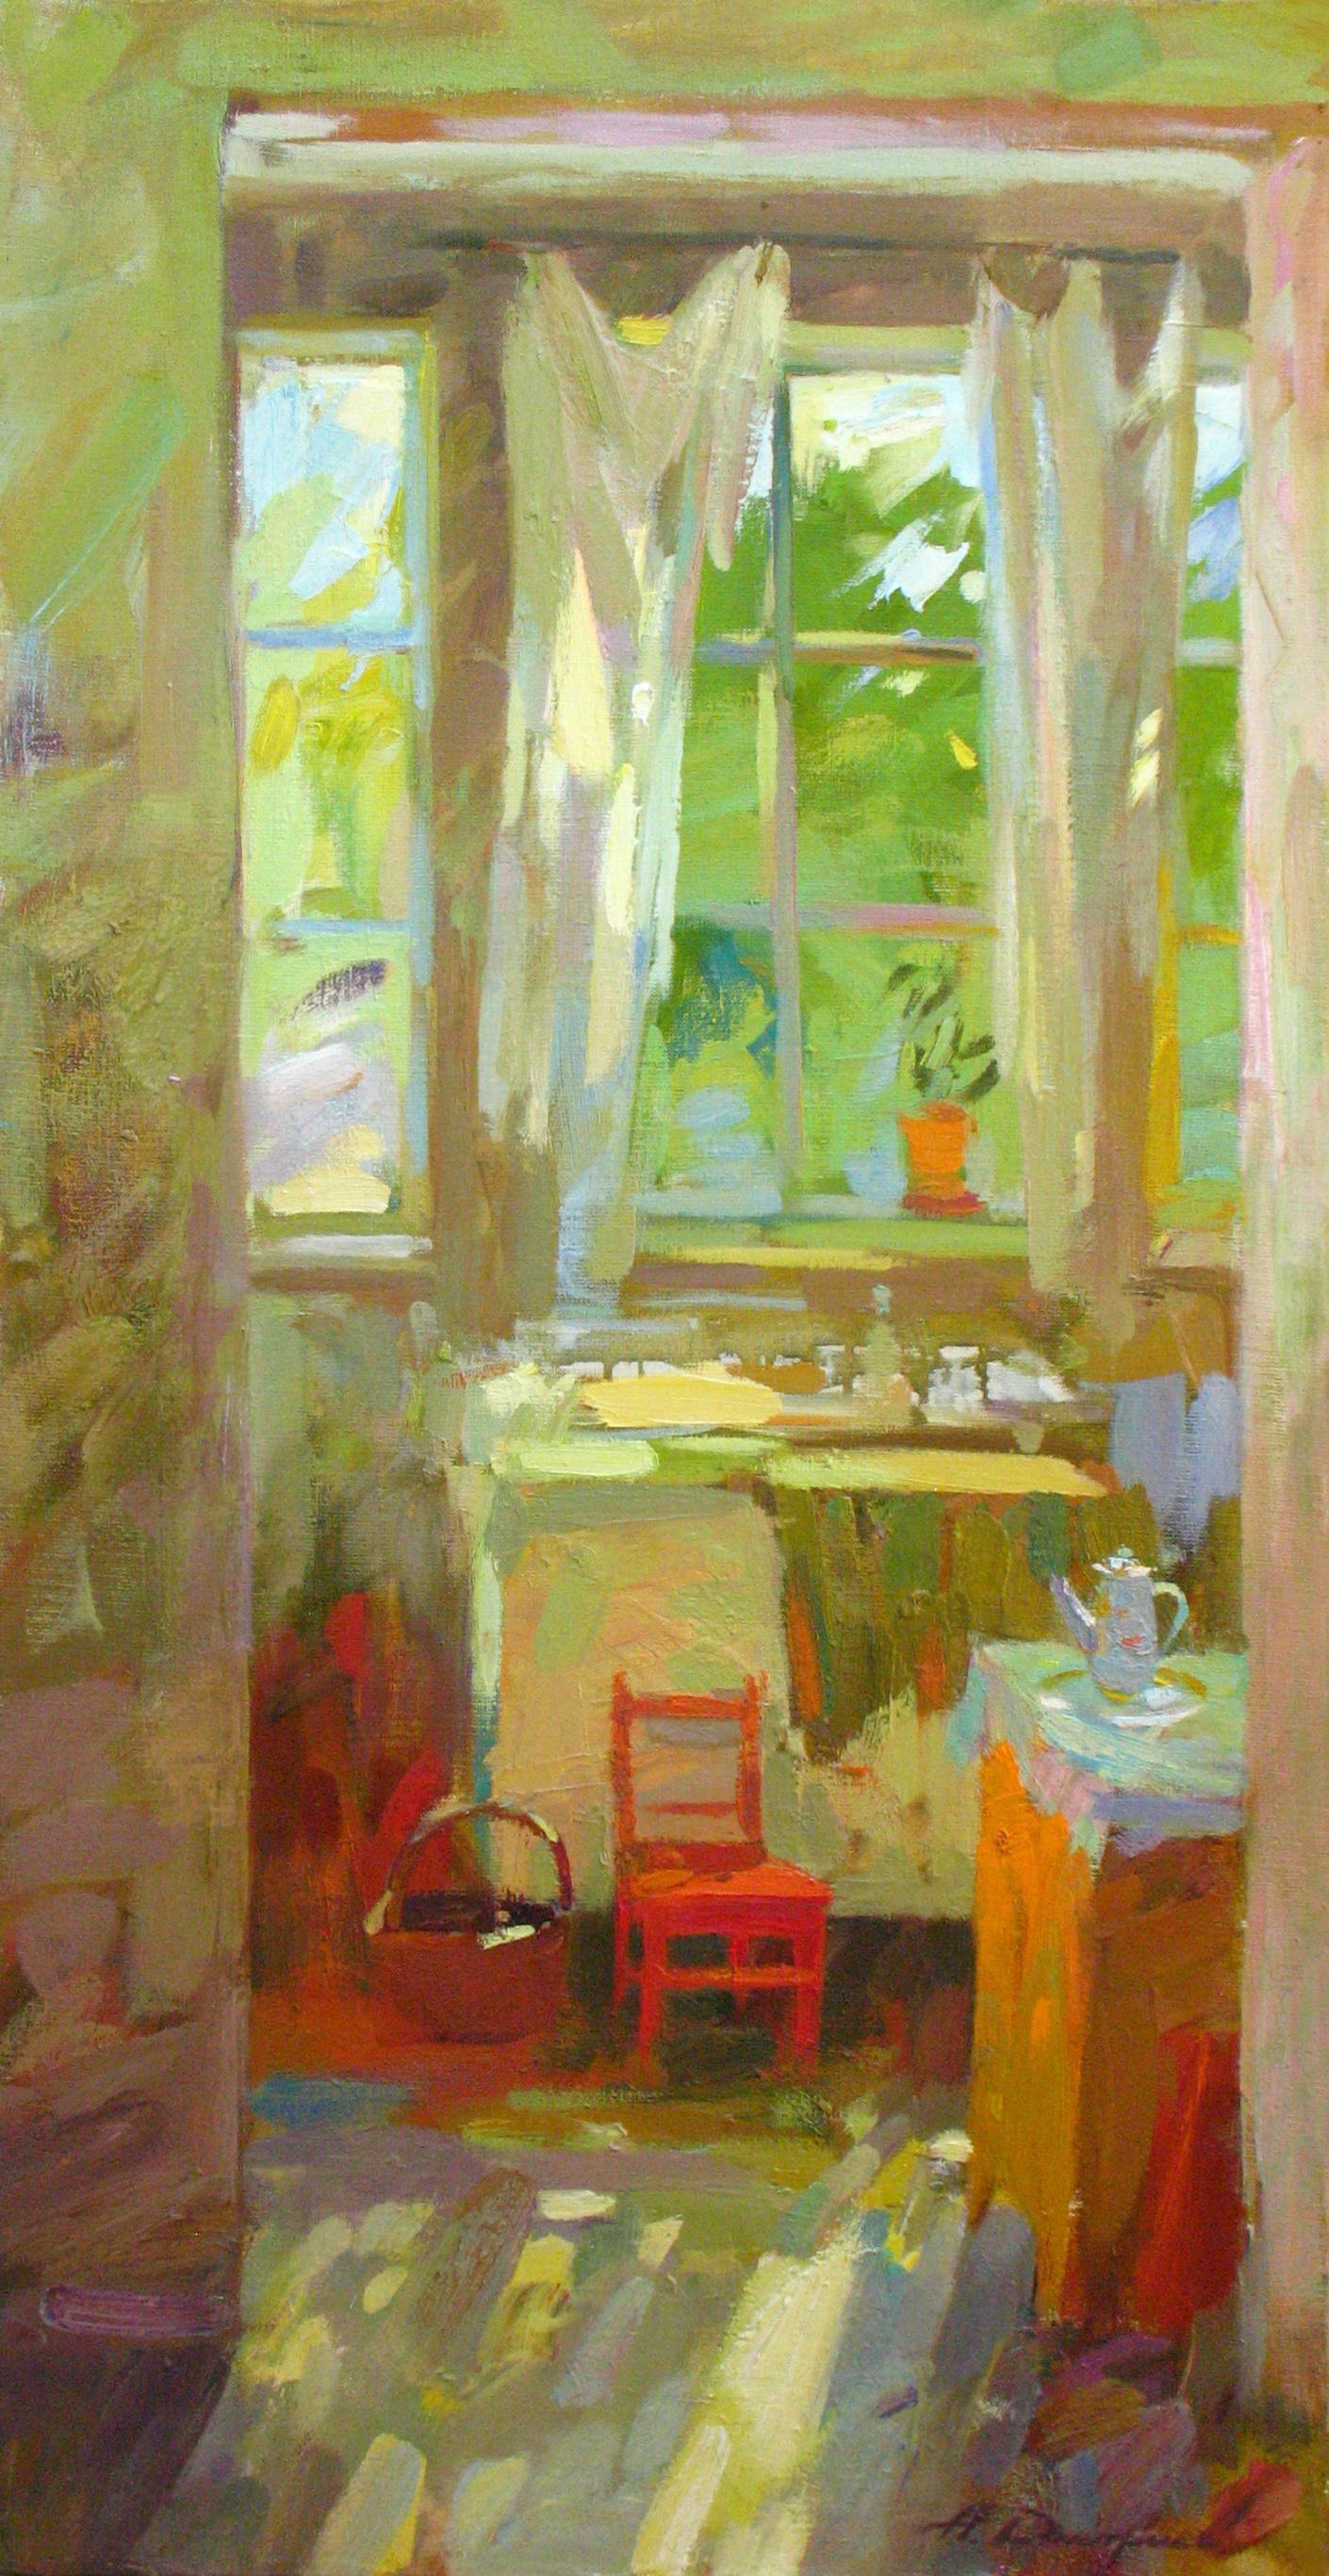 Dmitriev Alexey Olegovich Interior Painting - Sunny Morning Landscape Painting Oil Canvas Colors Green Yellow Orange Blue Red